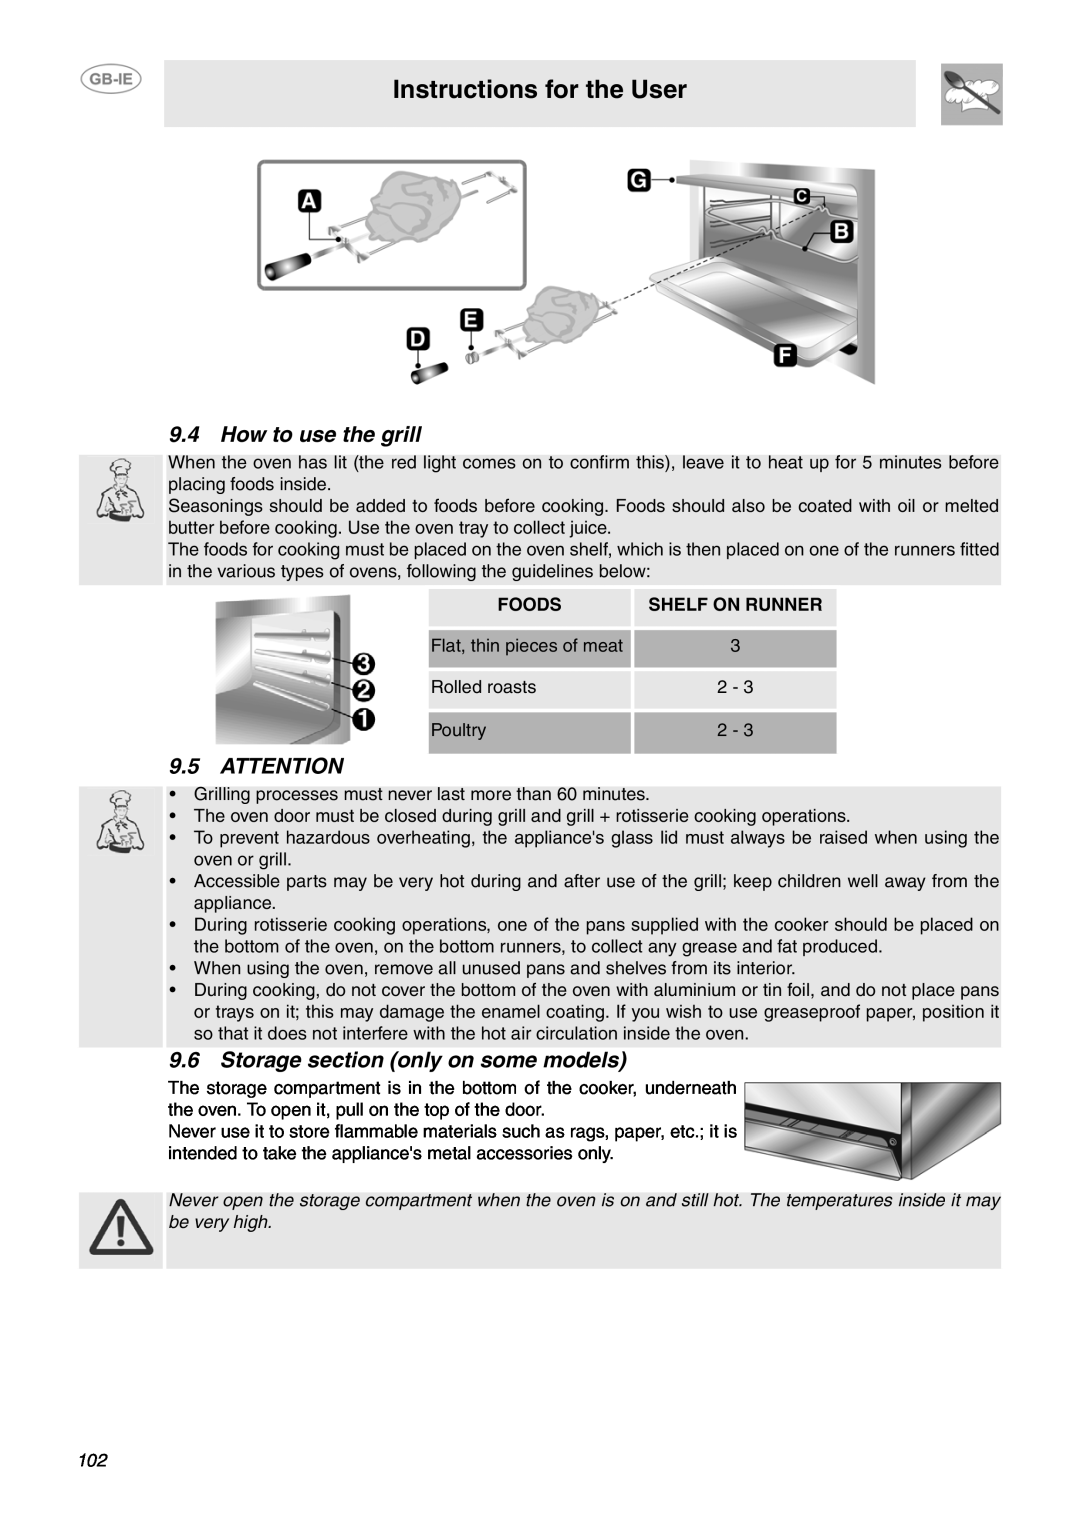 Smeg B71MPX5 How to use the grill, Storage section only on some models, Instructions for the User, Foods, Shelf On Runner 